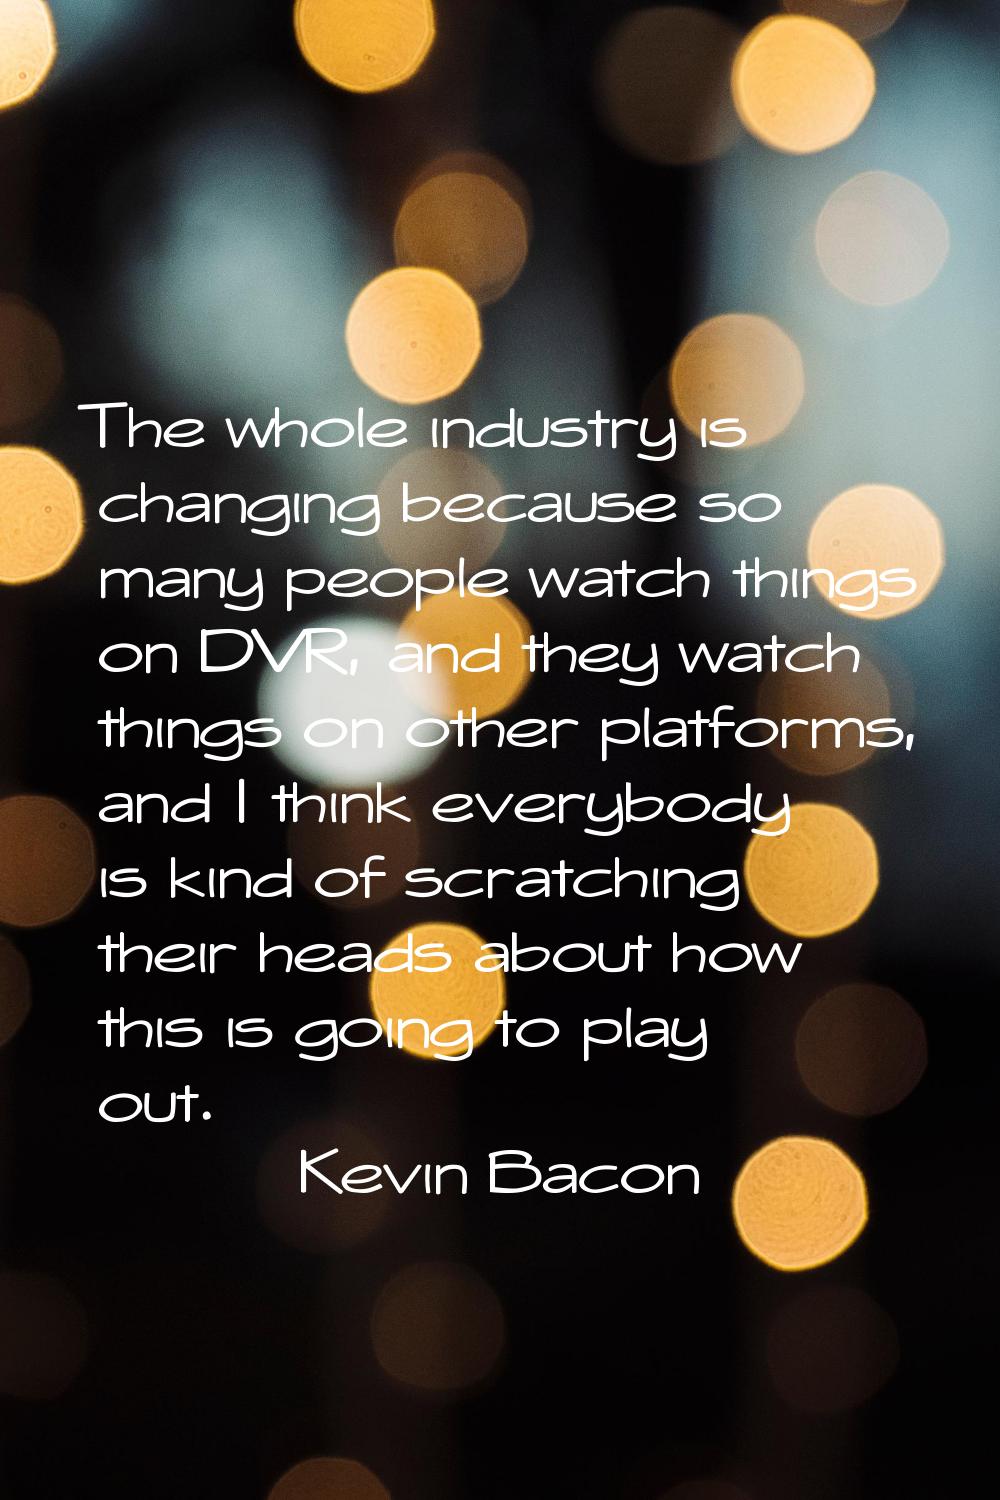 The whole industry is changing because so many people watch things on DVR, and they watch things on